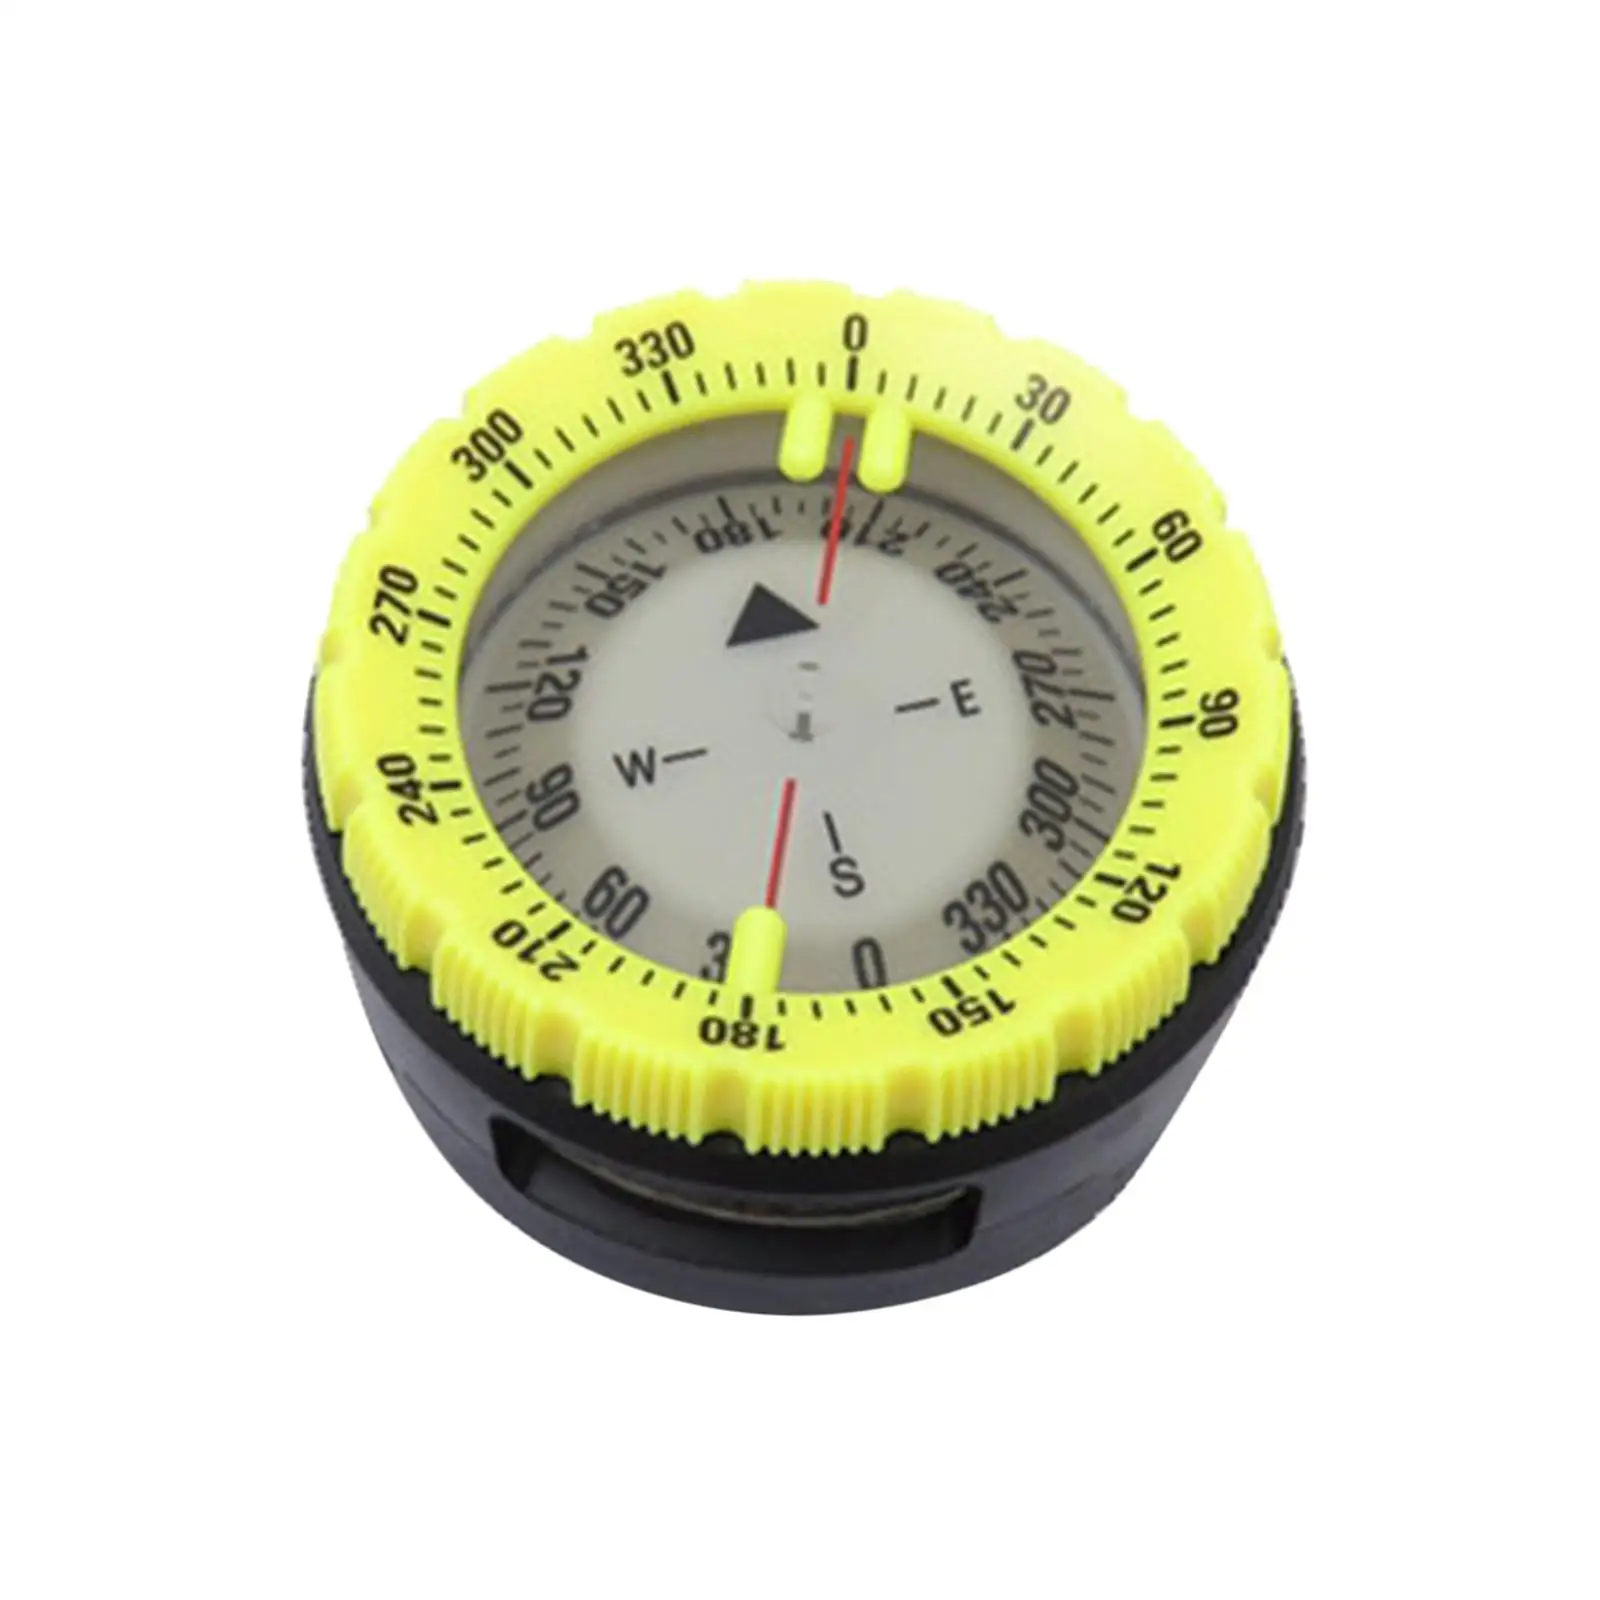 Camping Survival Compass Luminous Compass for Outdoor Hiking Orienteering